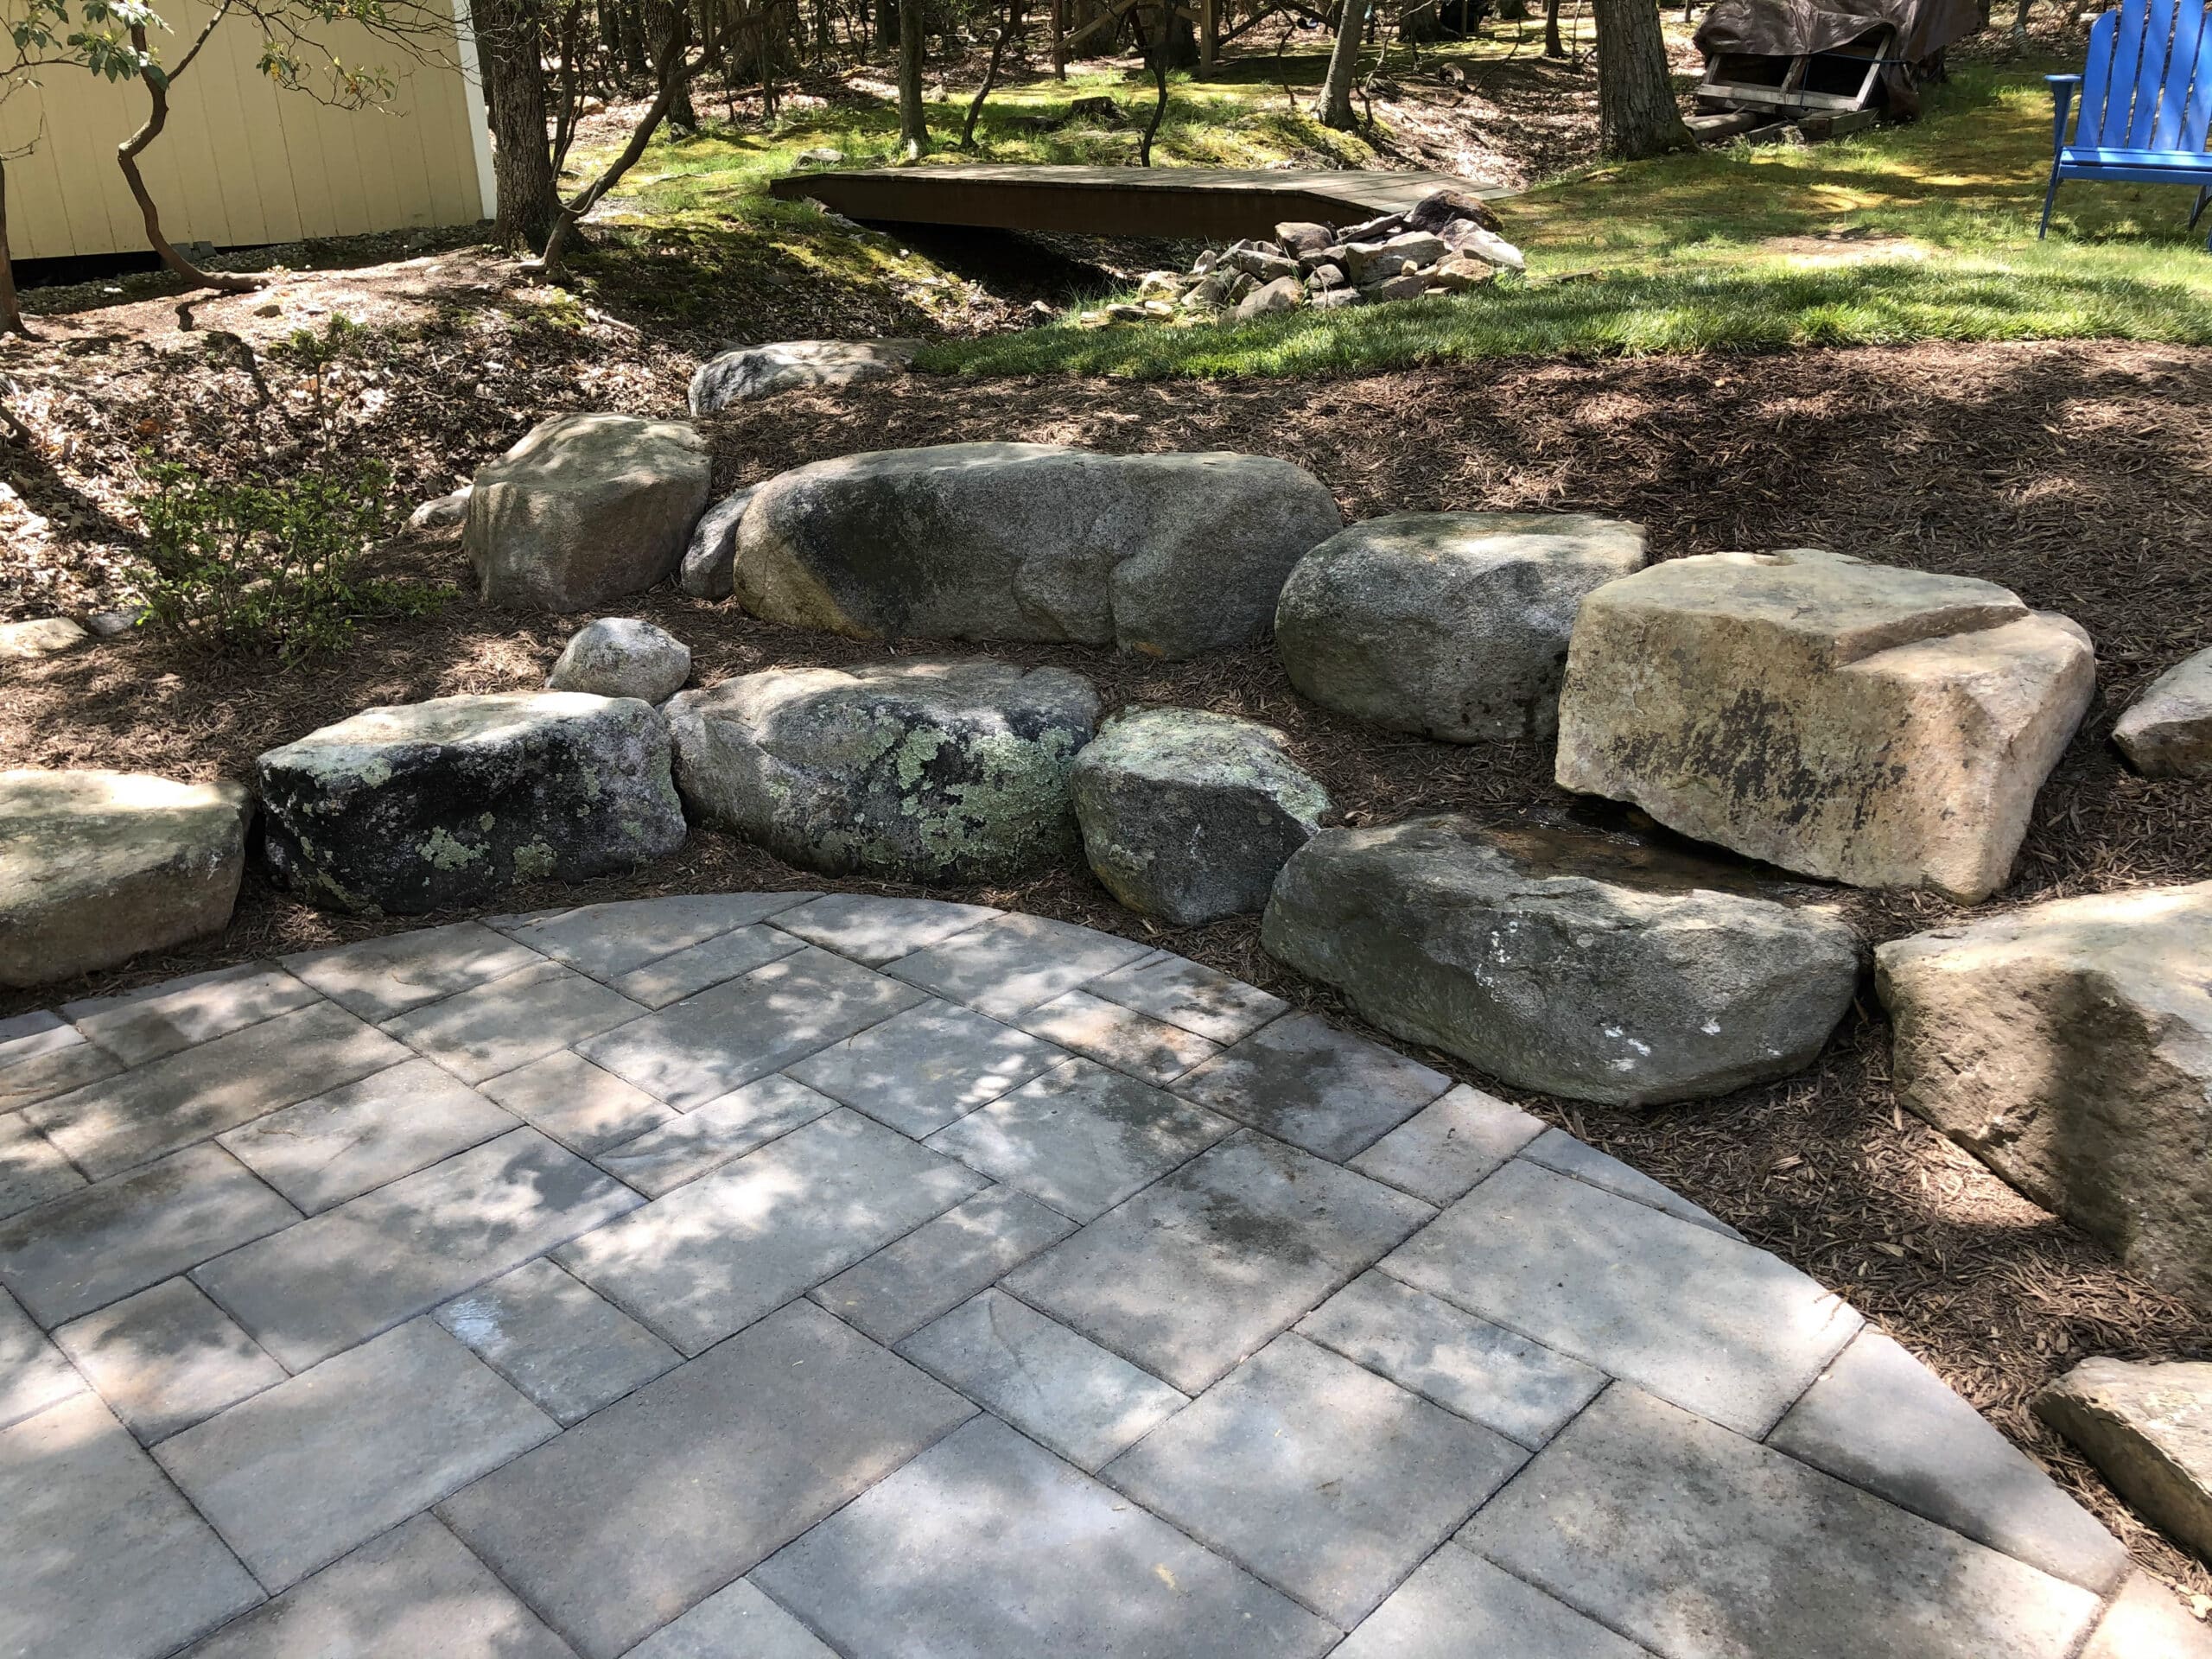 Sitting and Retaining Boulders